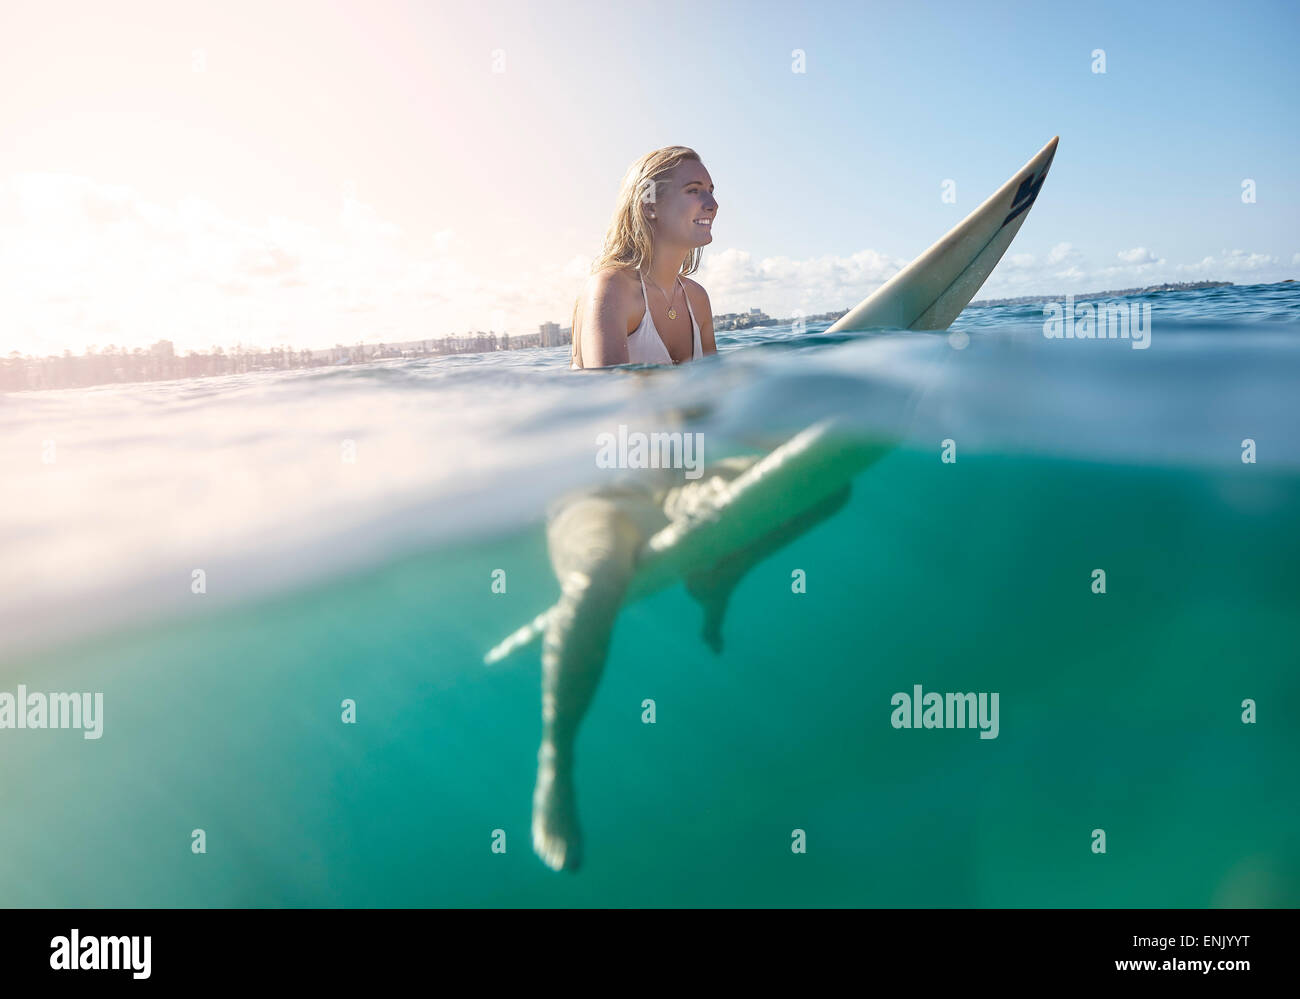 Girl on surfboard, New South Wales, Australia, Pacific Stock Photo